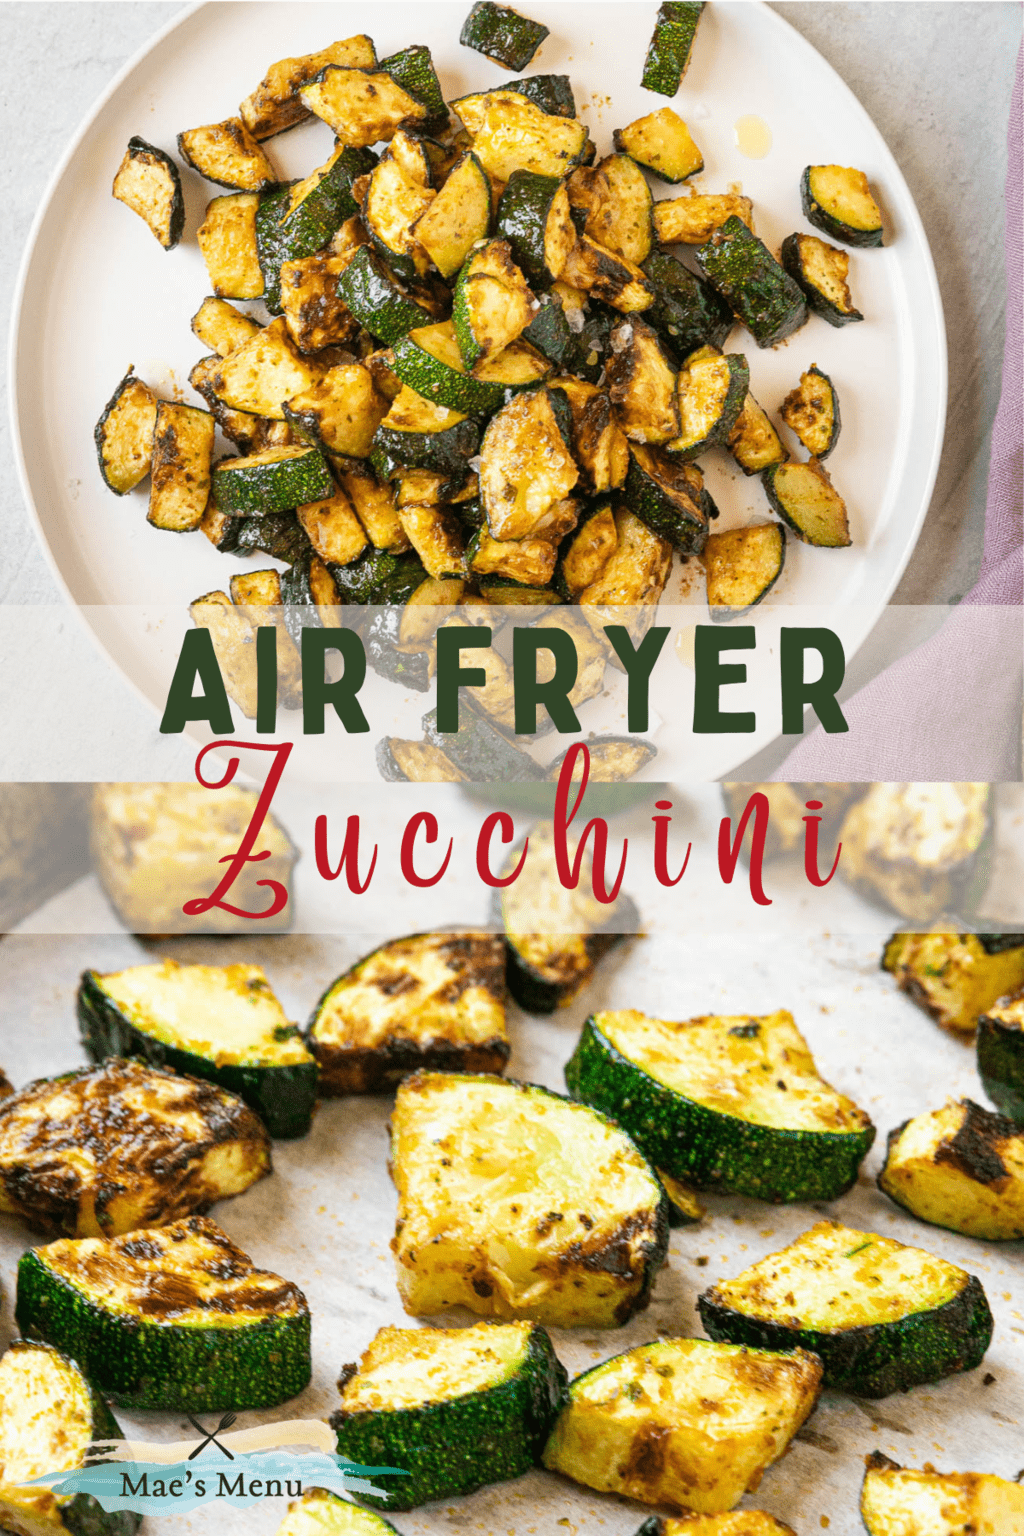 A pinterest pin for air fryer zucchini with an overhead shot of a plate of zucchini with an up-close side shot of the zucchini on a pan.